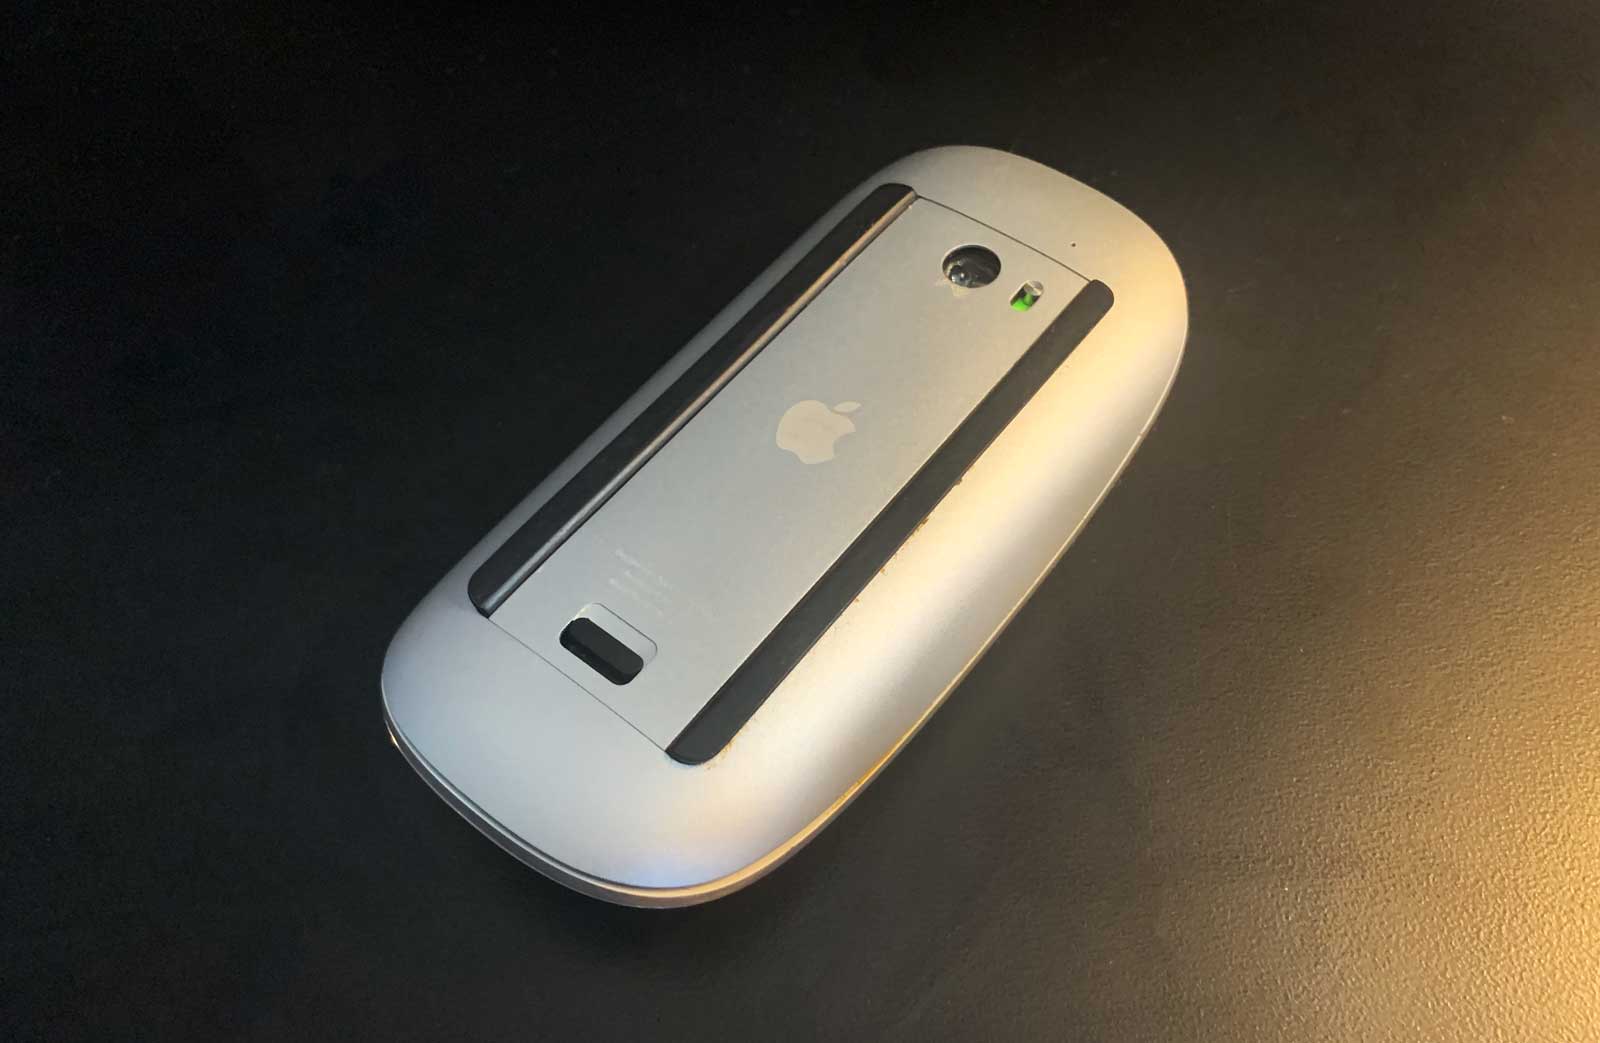 However, some users report much shorter life when using the Magic Mouse 1